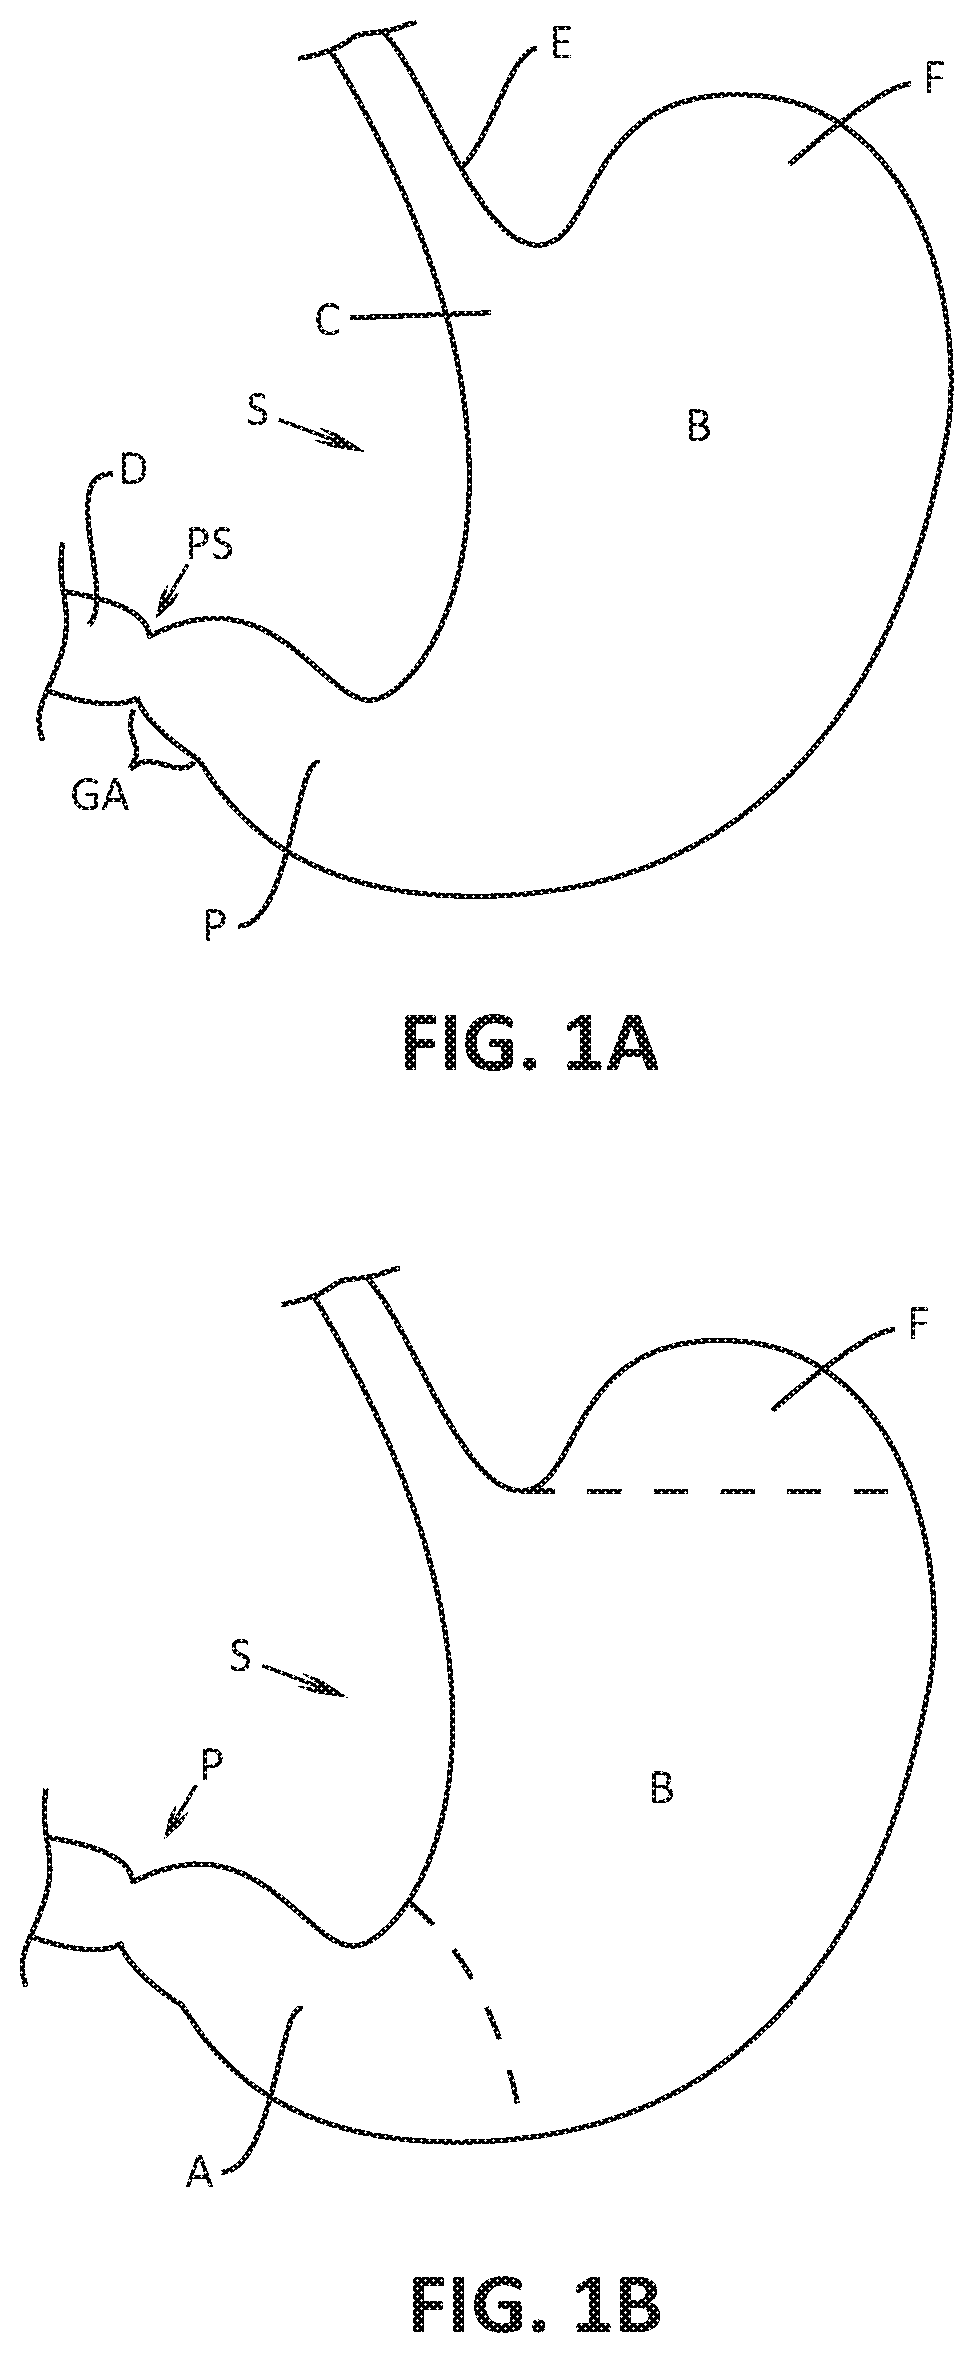 Propulsive drug delivery from a swallowable device into a patients intestinal tract